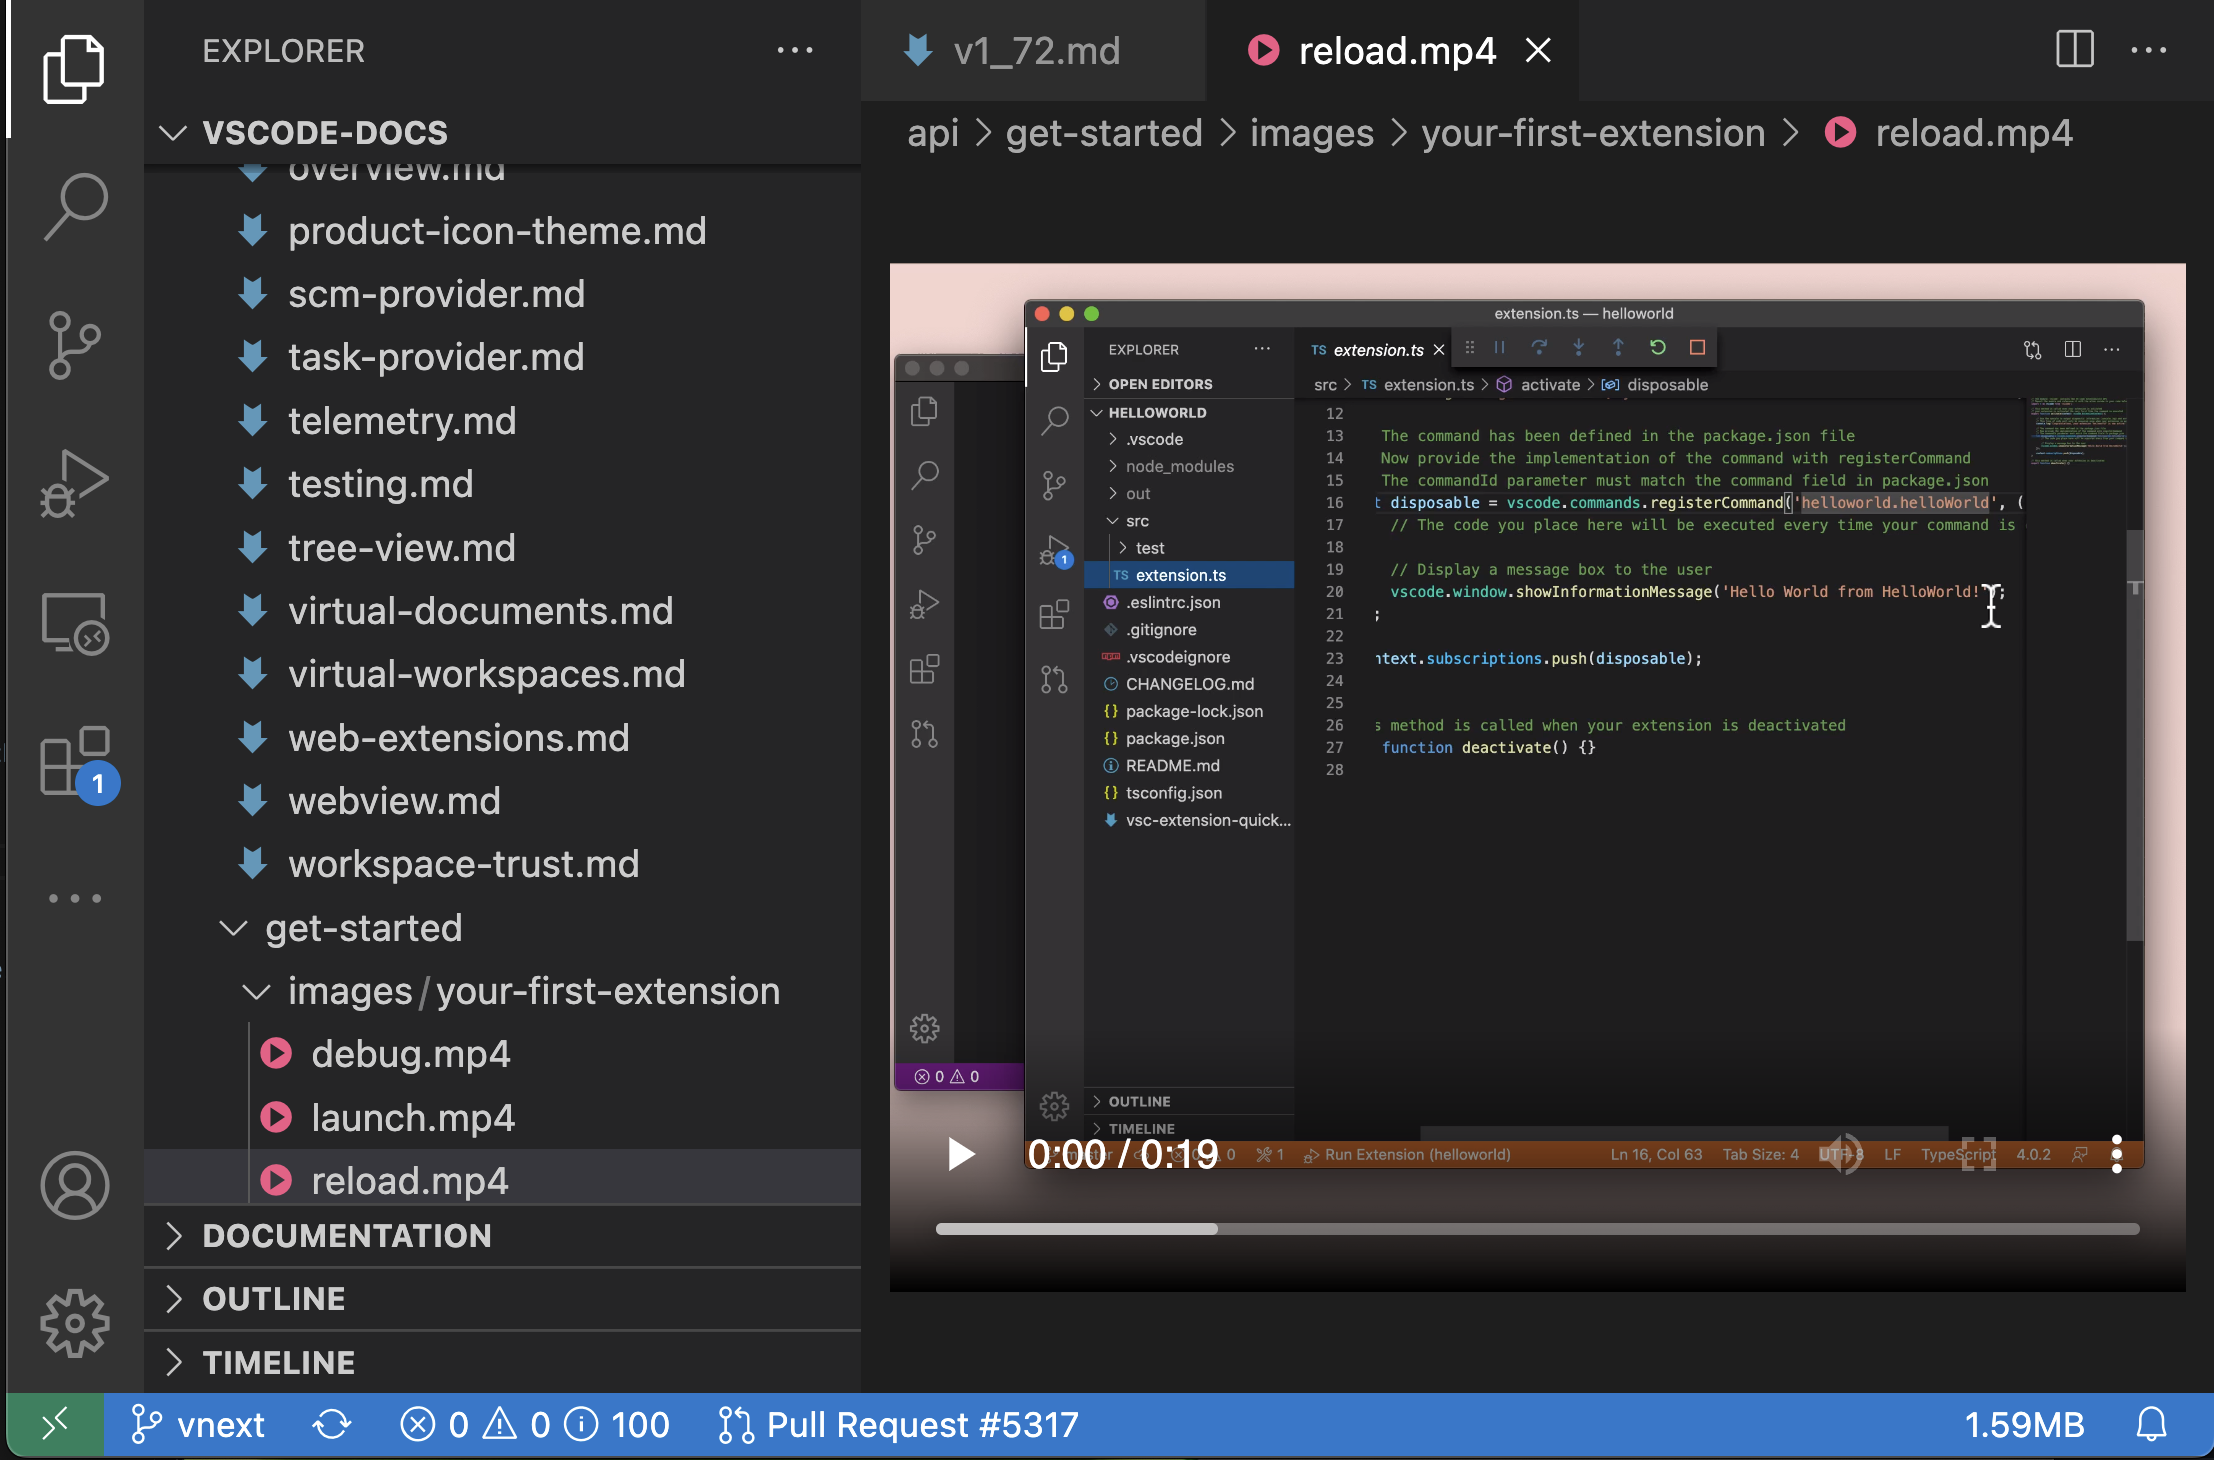 Previewing an MP4 video in VS Code